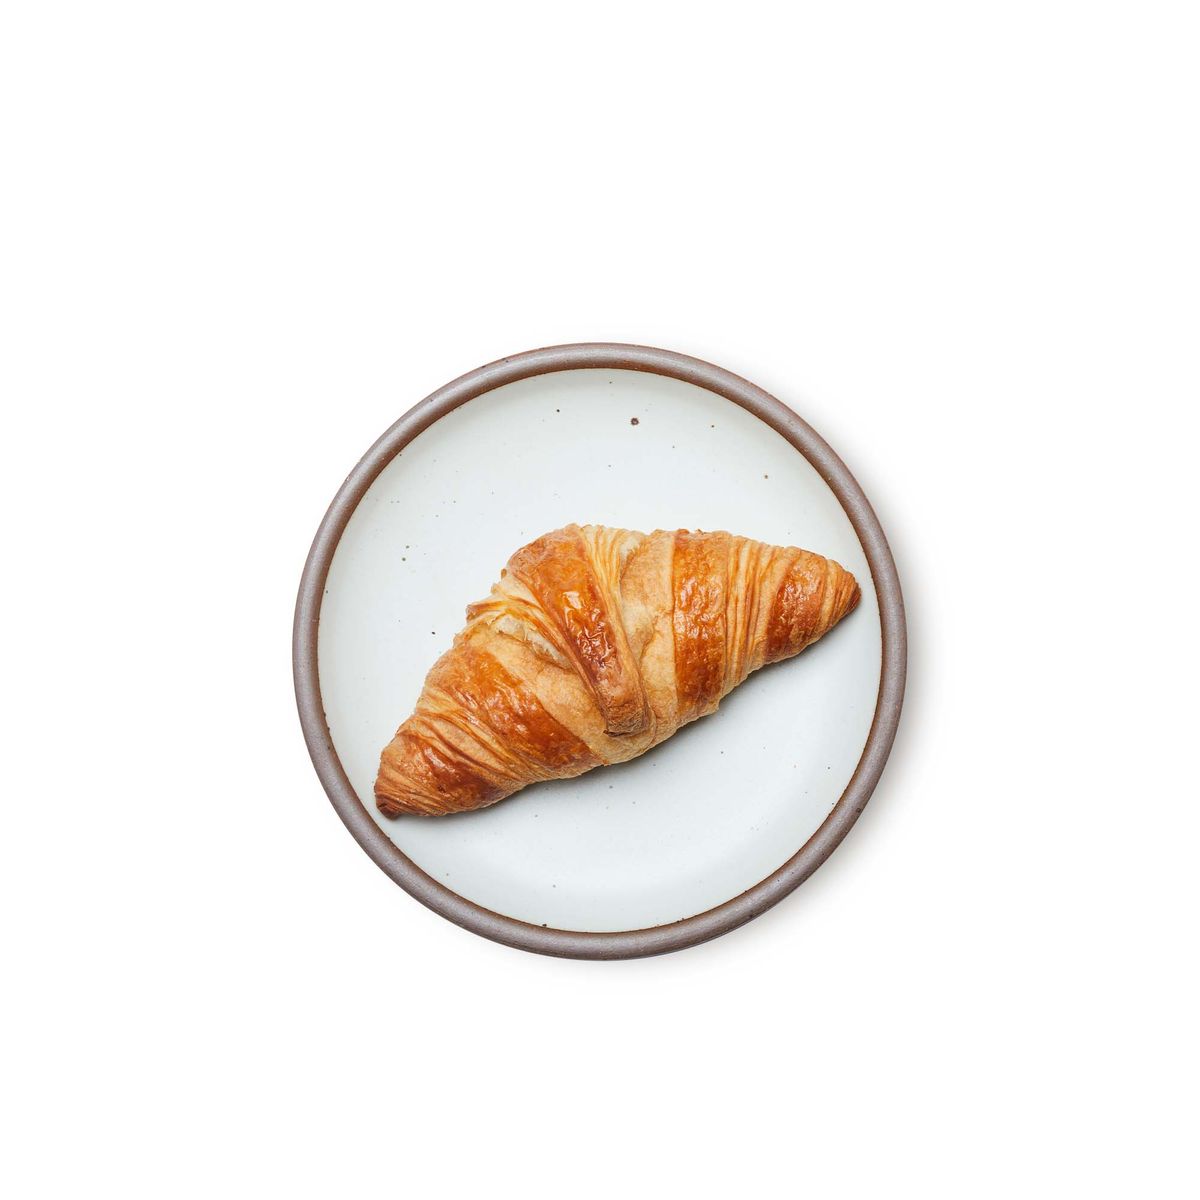 A croissant on a medium sized ceramic plate in a cool white color featuring iron speckles and an unglazed rim.